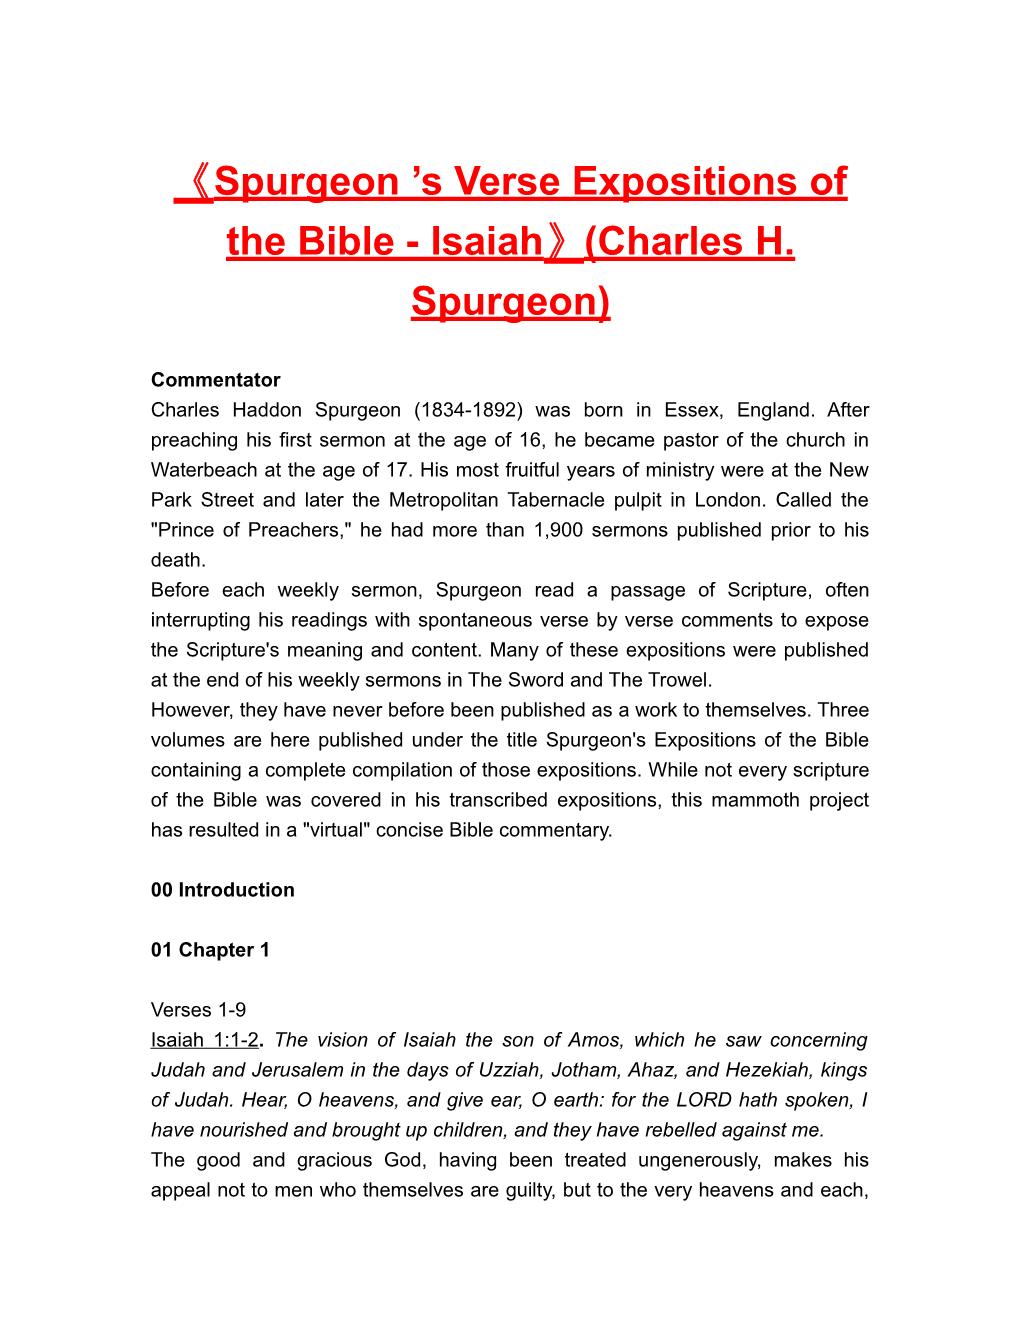 Spurgeon S Verseexpositions of the Bible - Isaiah (Charles H. Spurgeon)